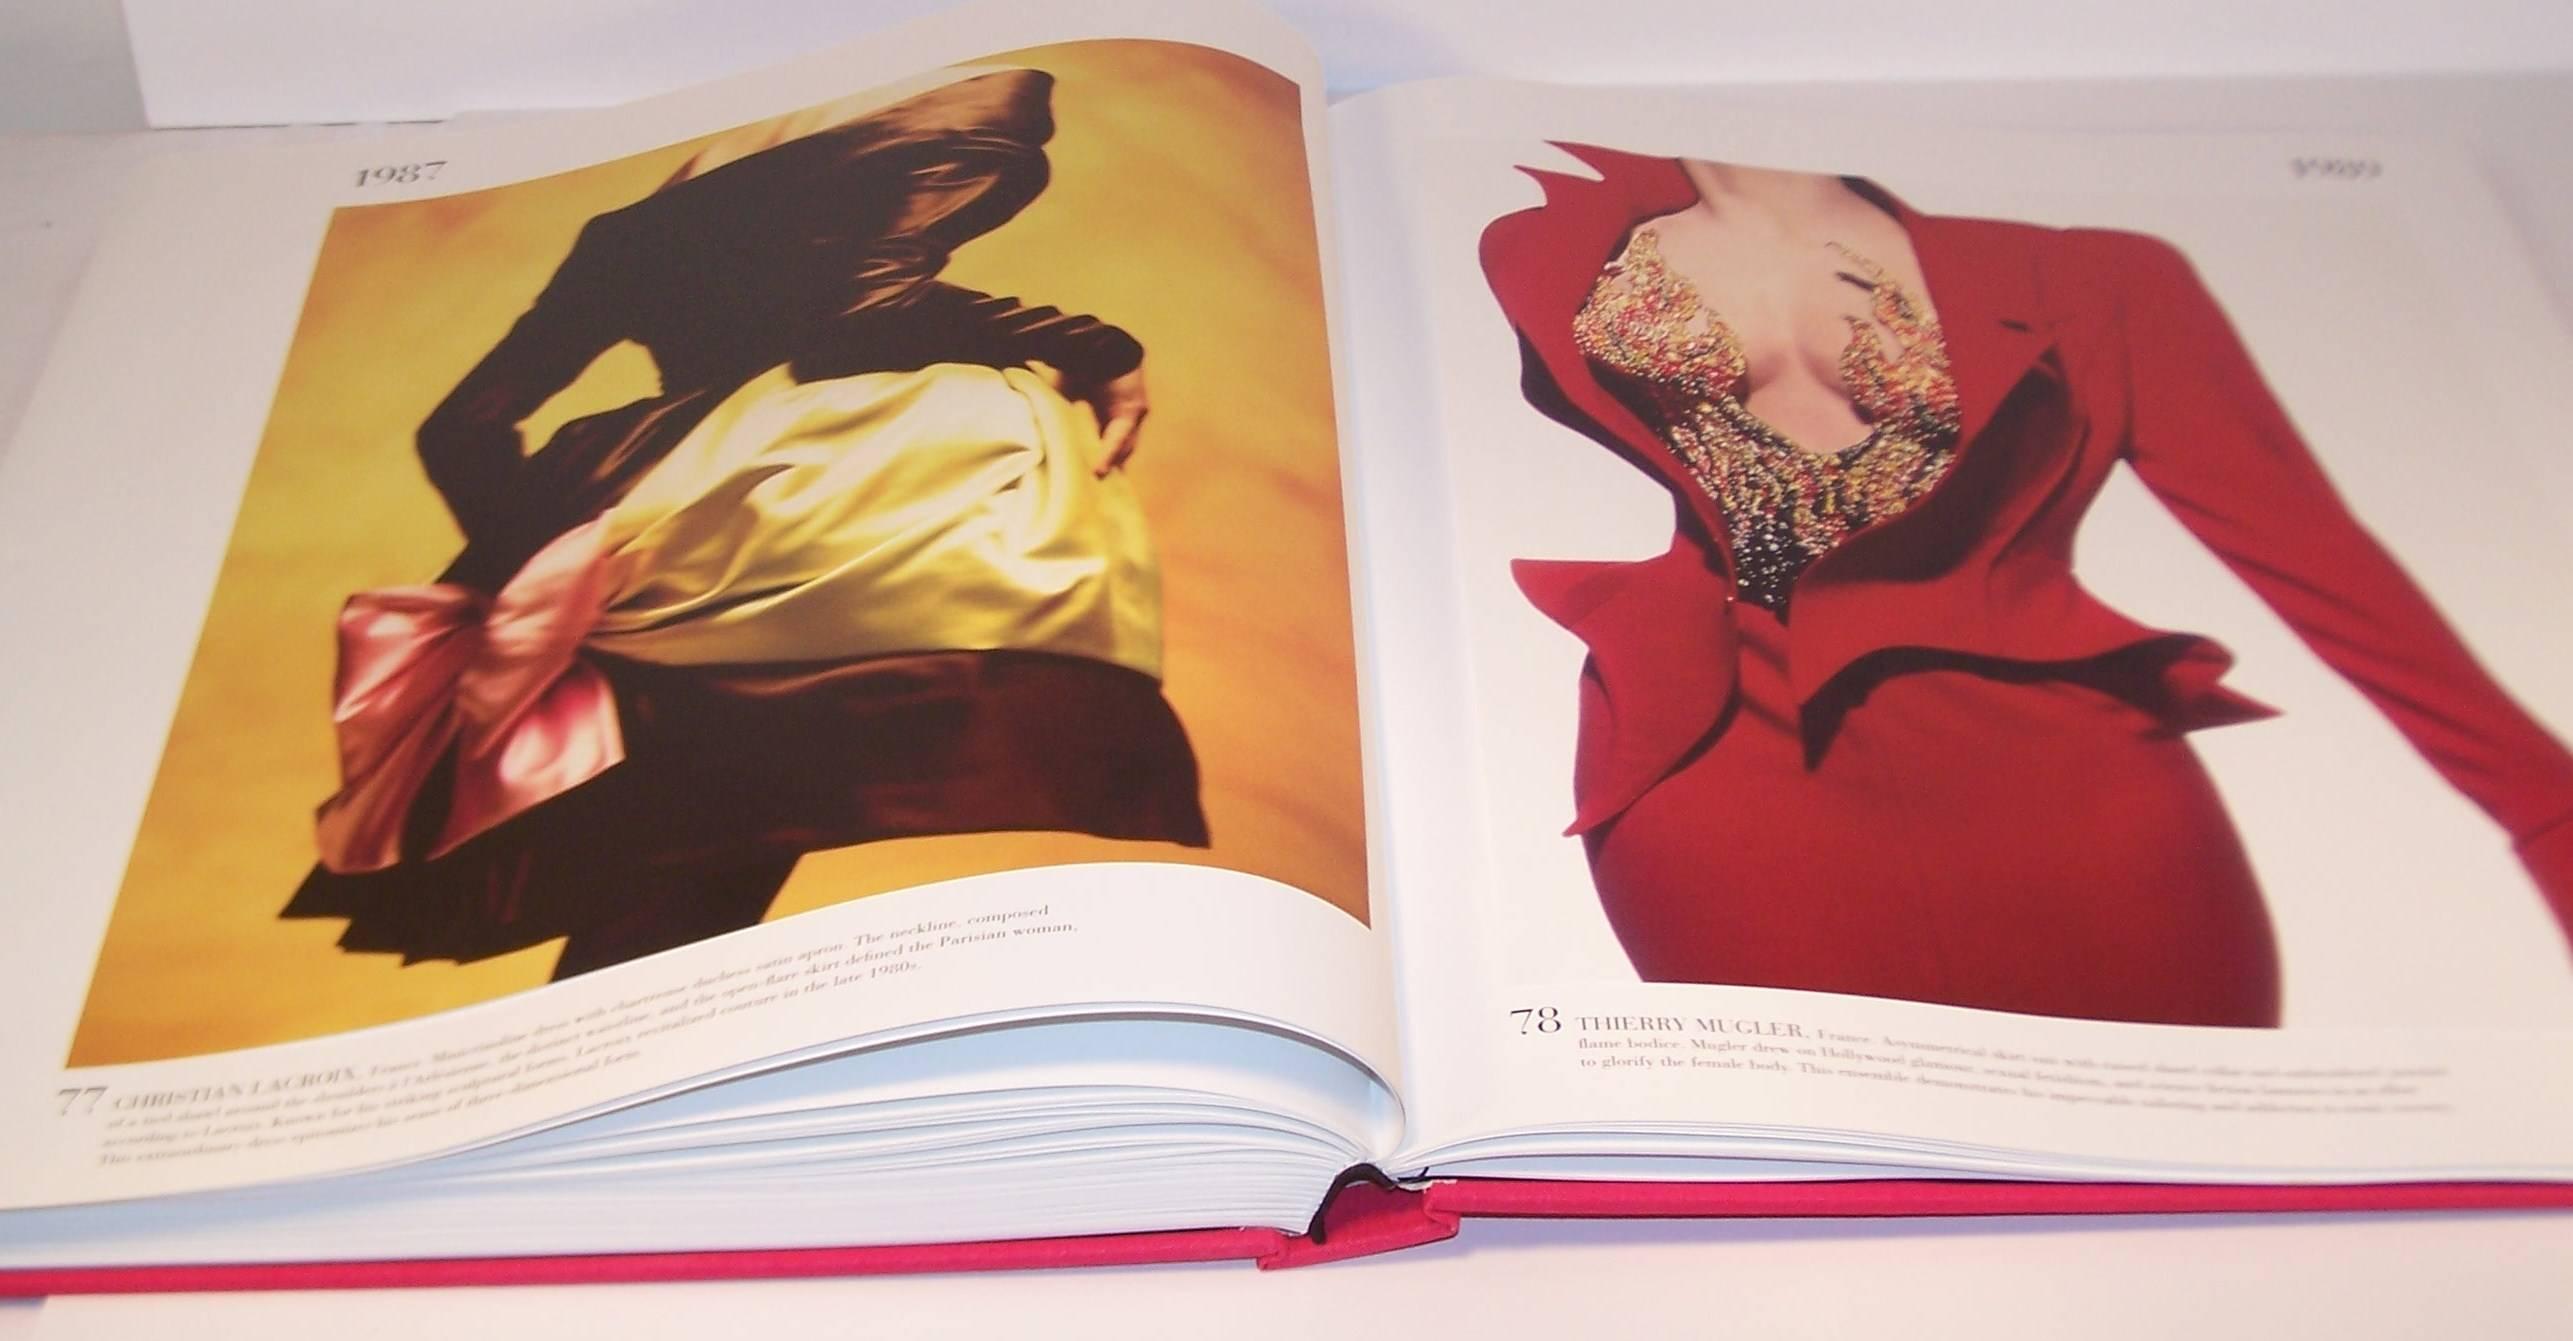 2011 Presentation Coffee Table Book of The Impossible Collection of Fashion 3